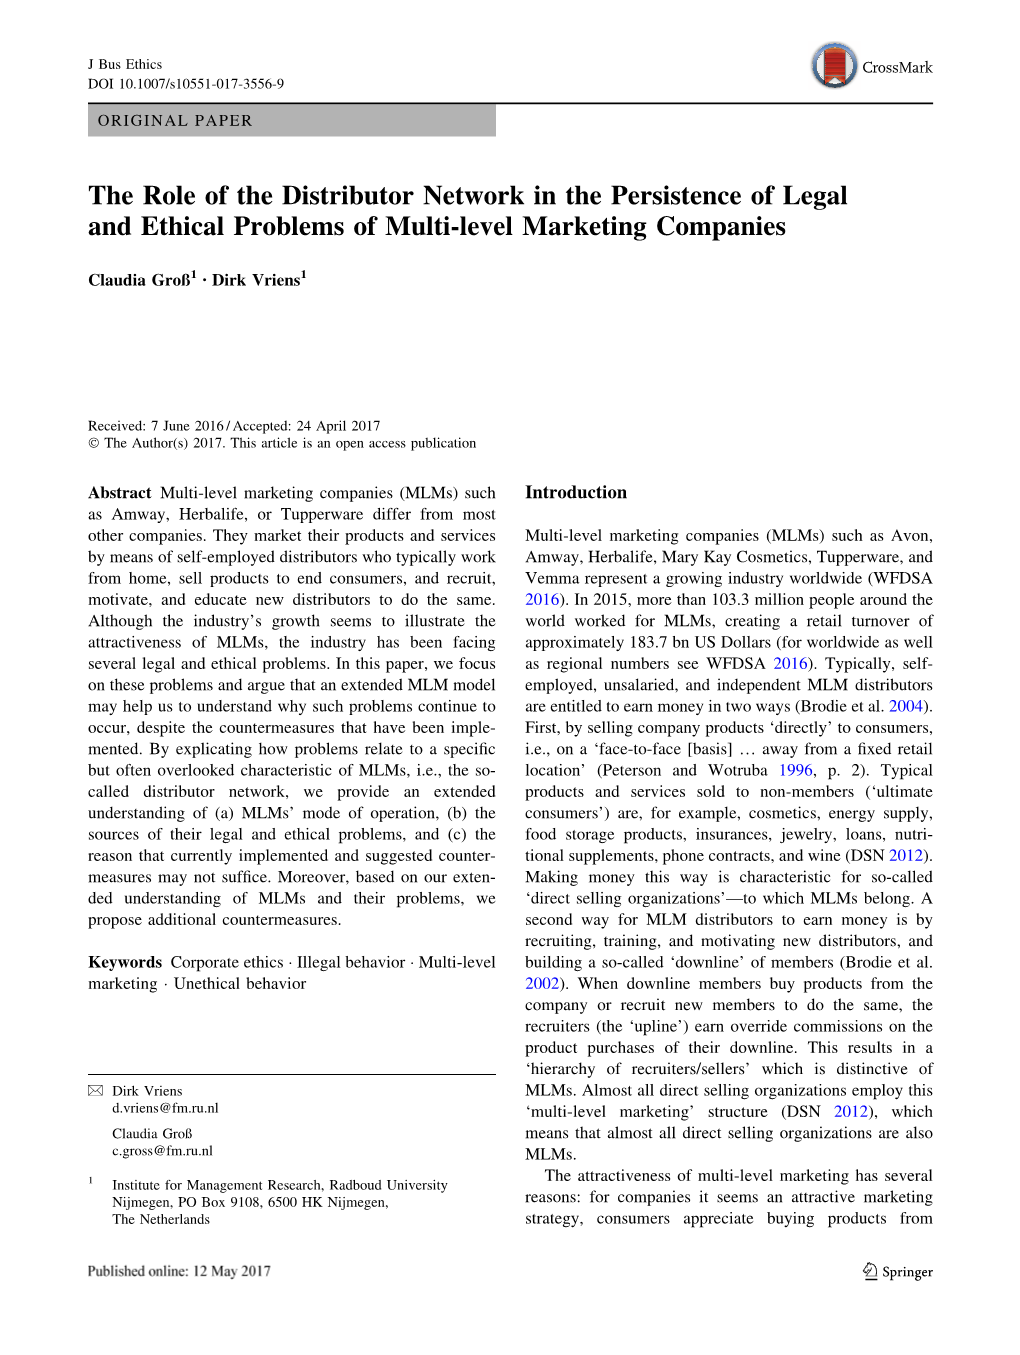 The Role of the Distributor Network in the Persistence of Legal and Ethical Problems of Multi-Level Marketing Companies